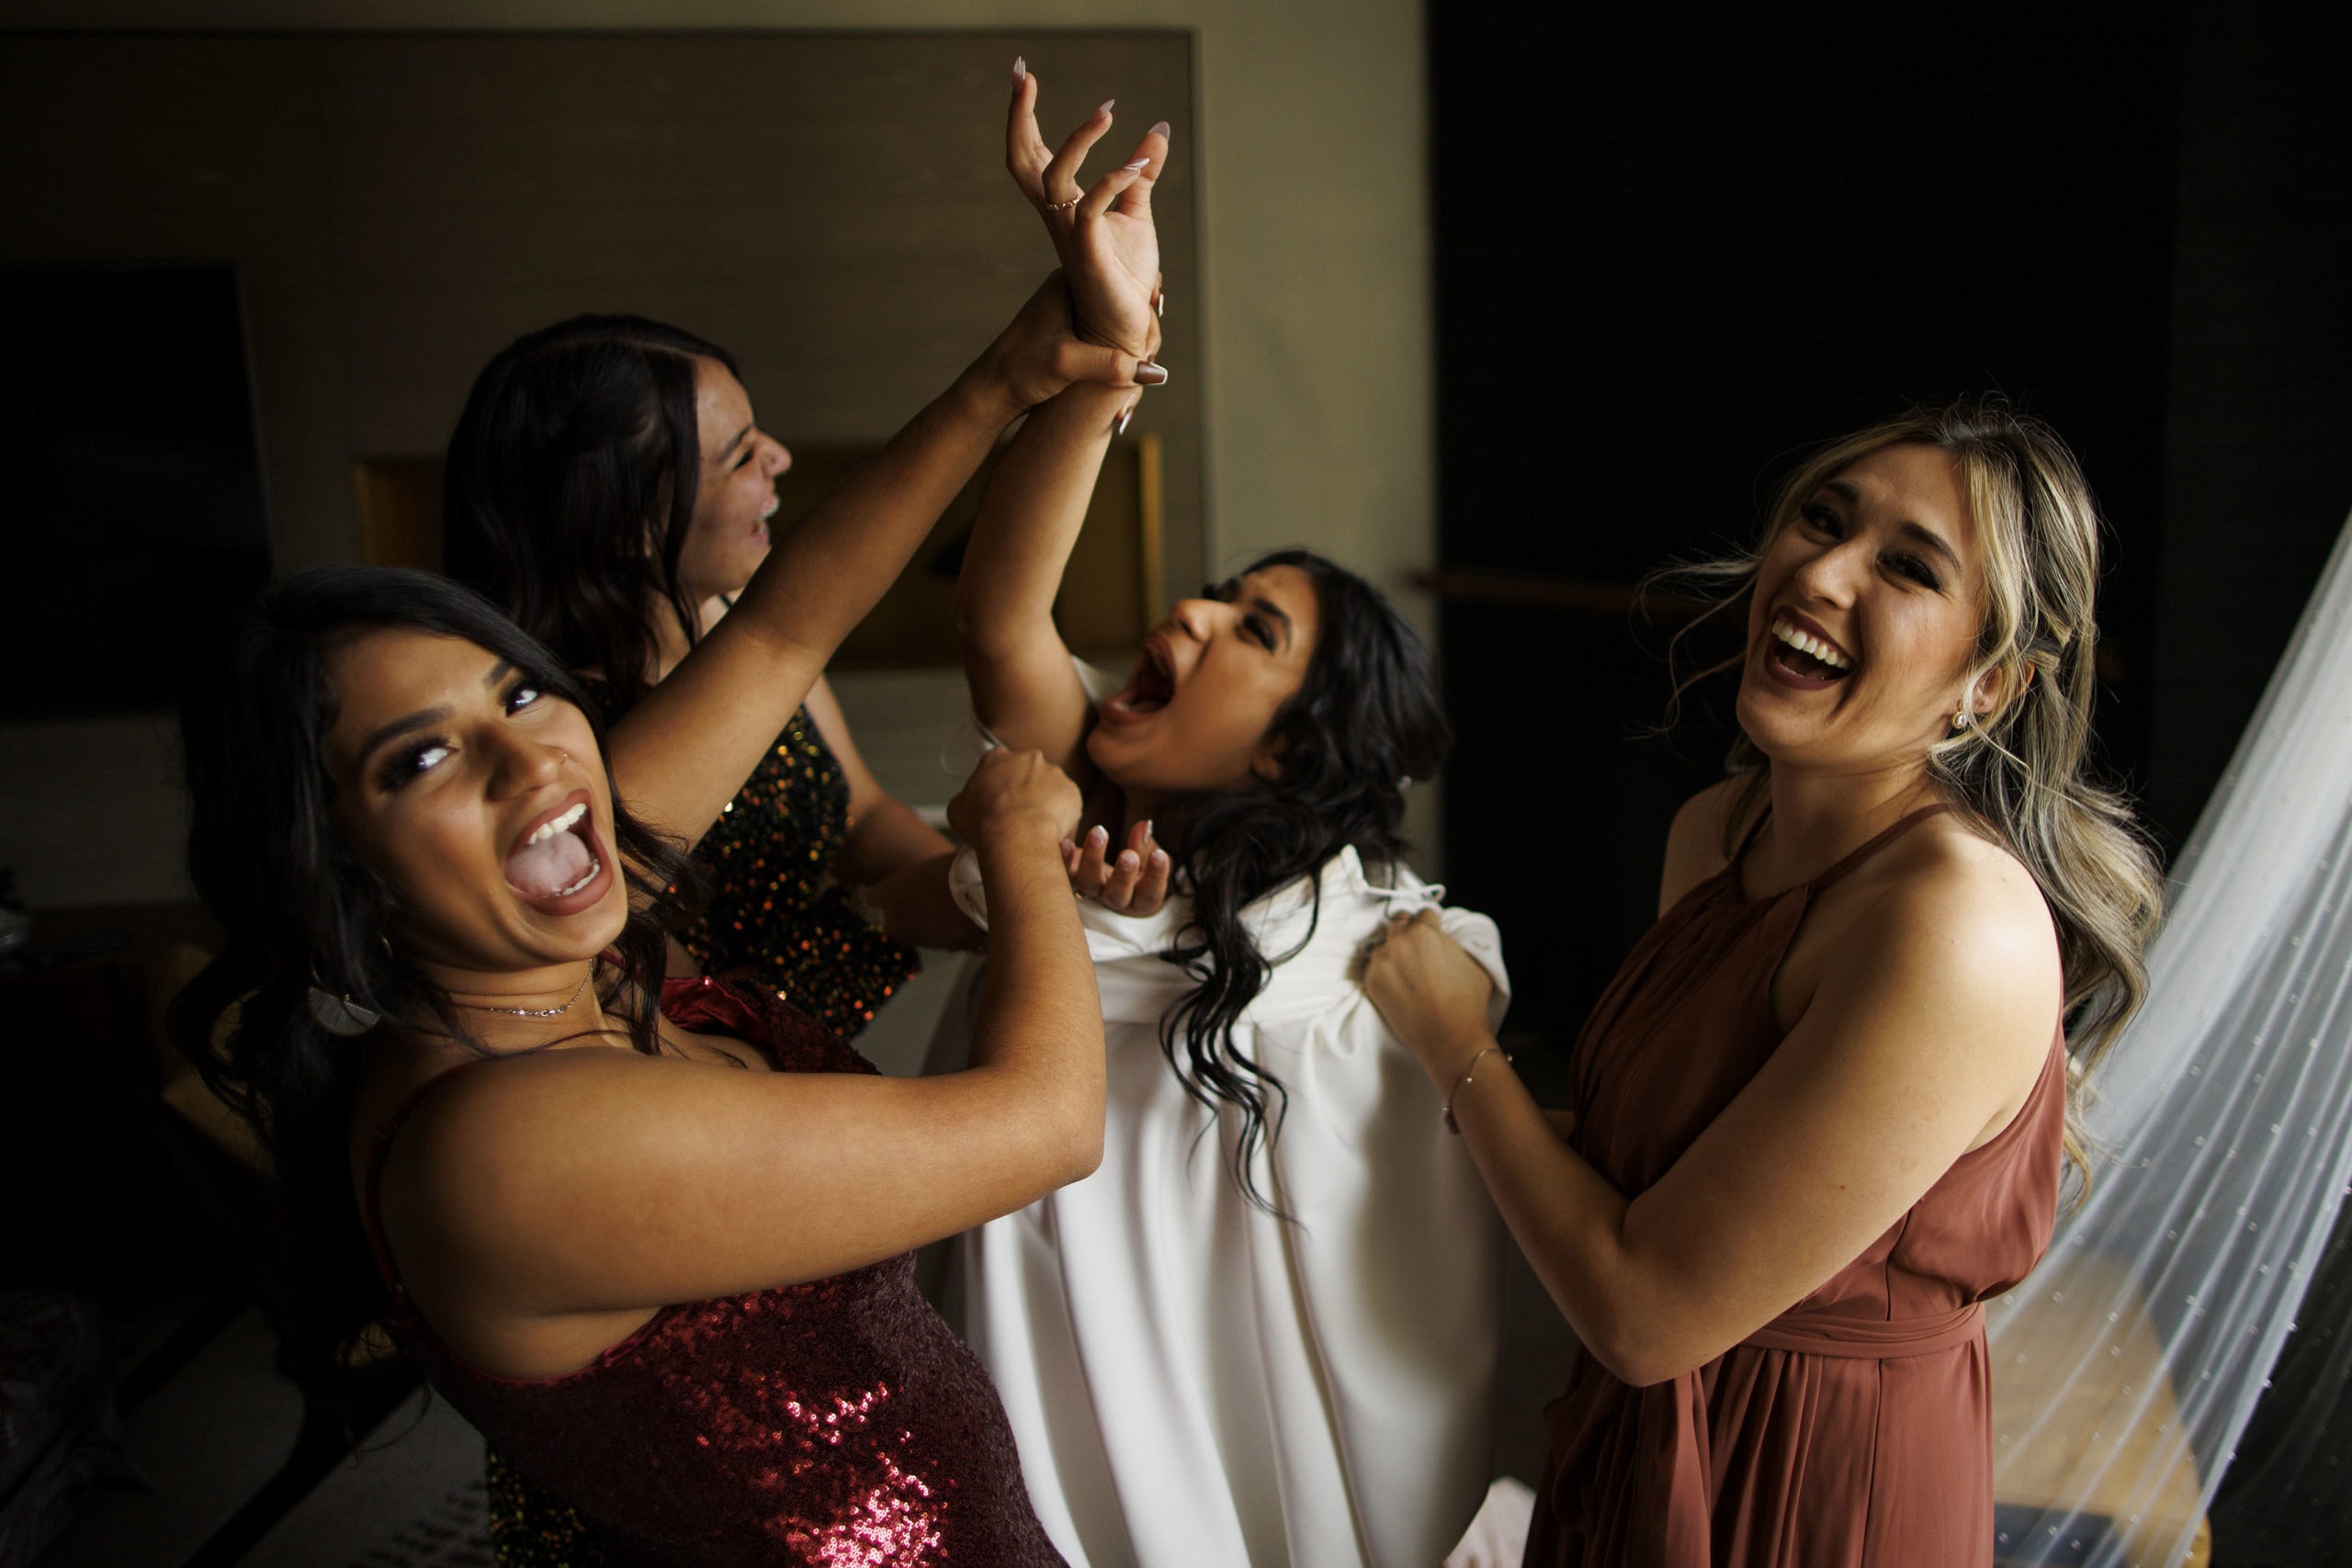 The bride laughs with friends while getting into her wedding dress